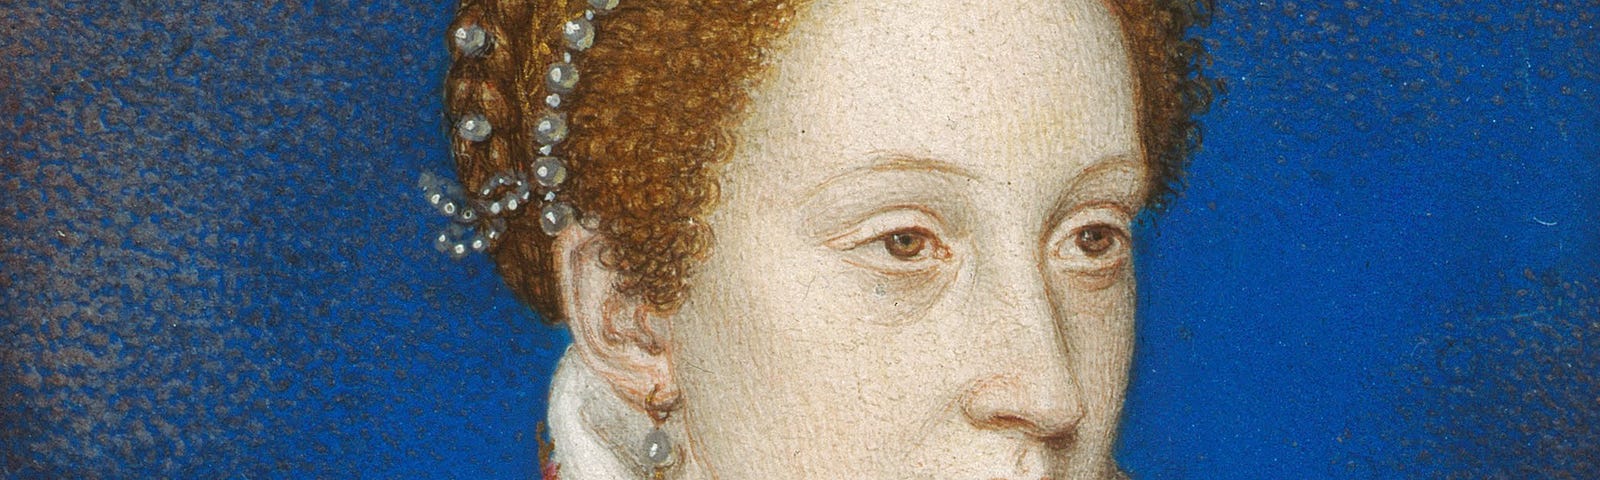 Painting of 17-year-old Mary Queen of Scots. She is wearing a red dress. Her red hair is up and adorned with jewels.